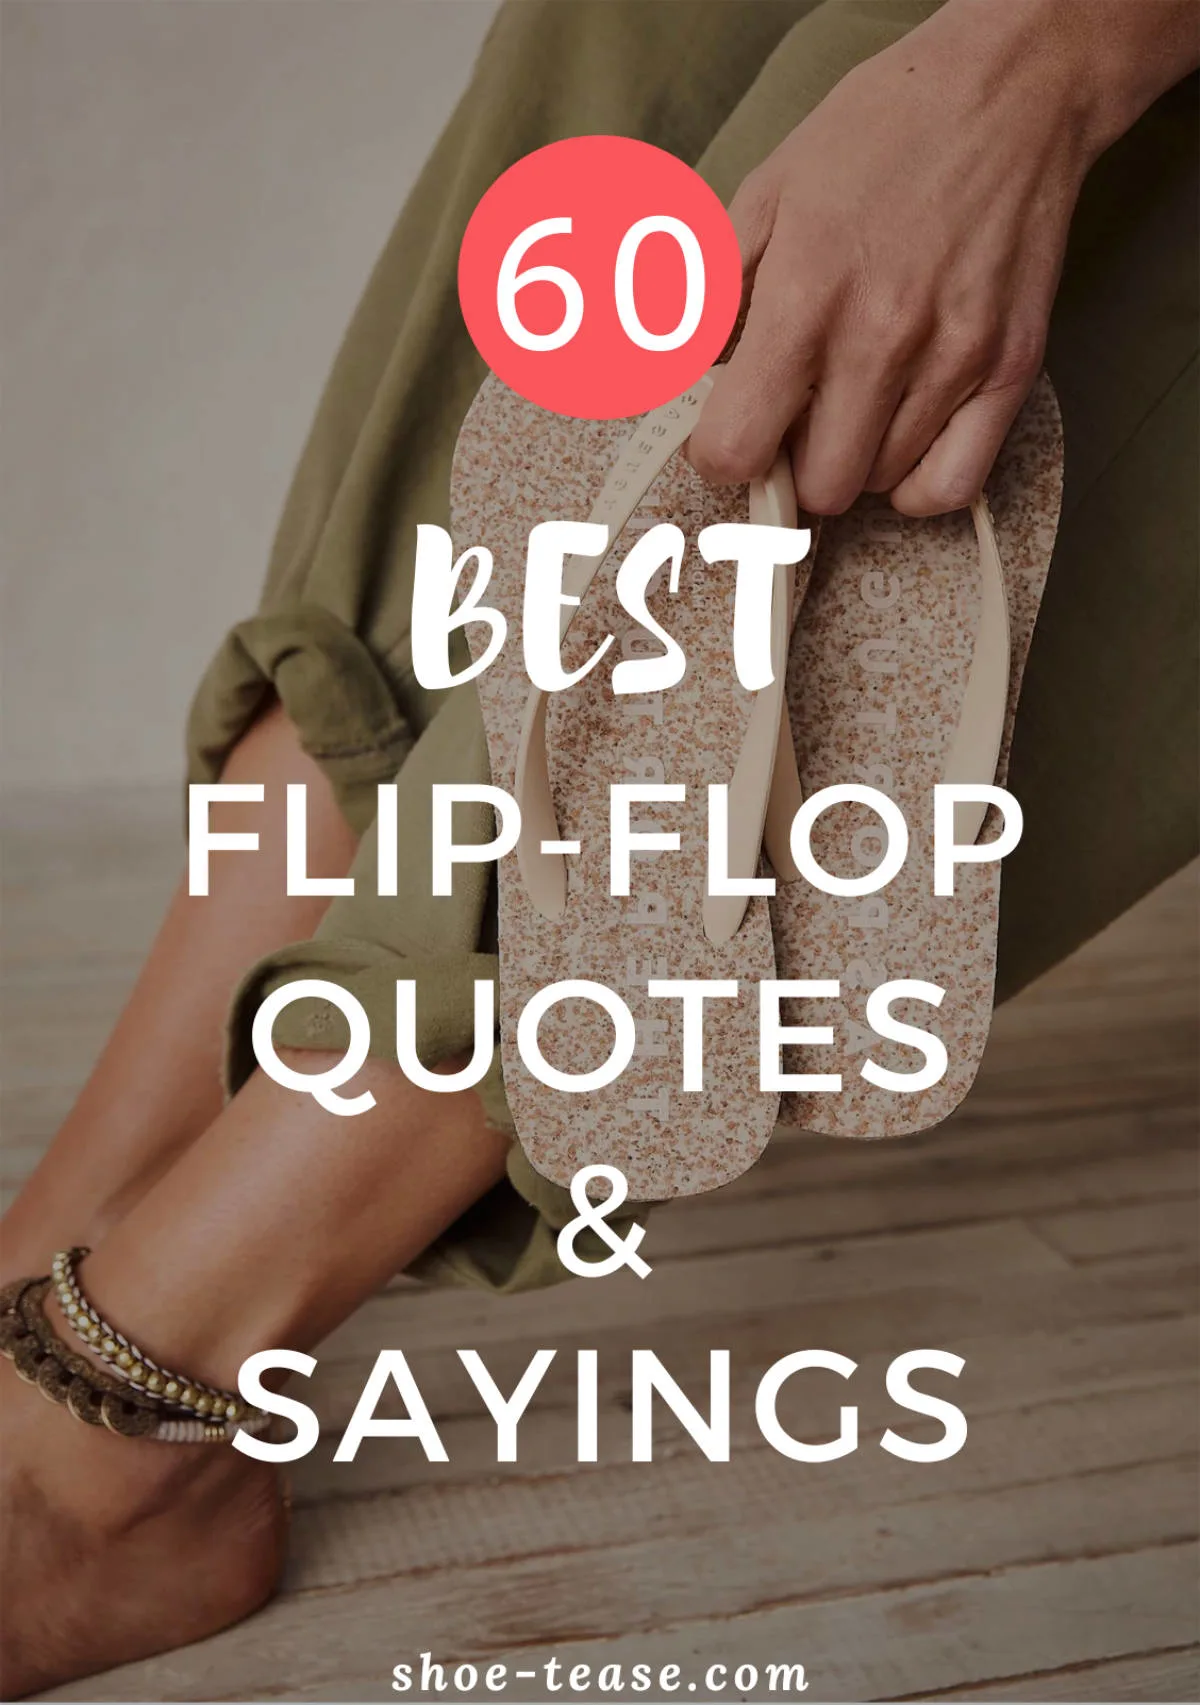 Text reading 60 best flip flop quotes and sayings over image of woman holding flip flops white sitting.